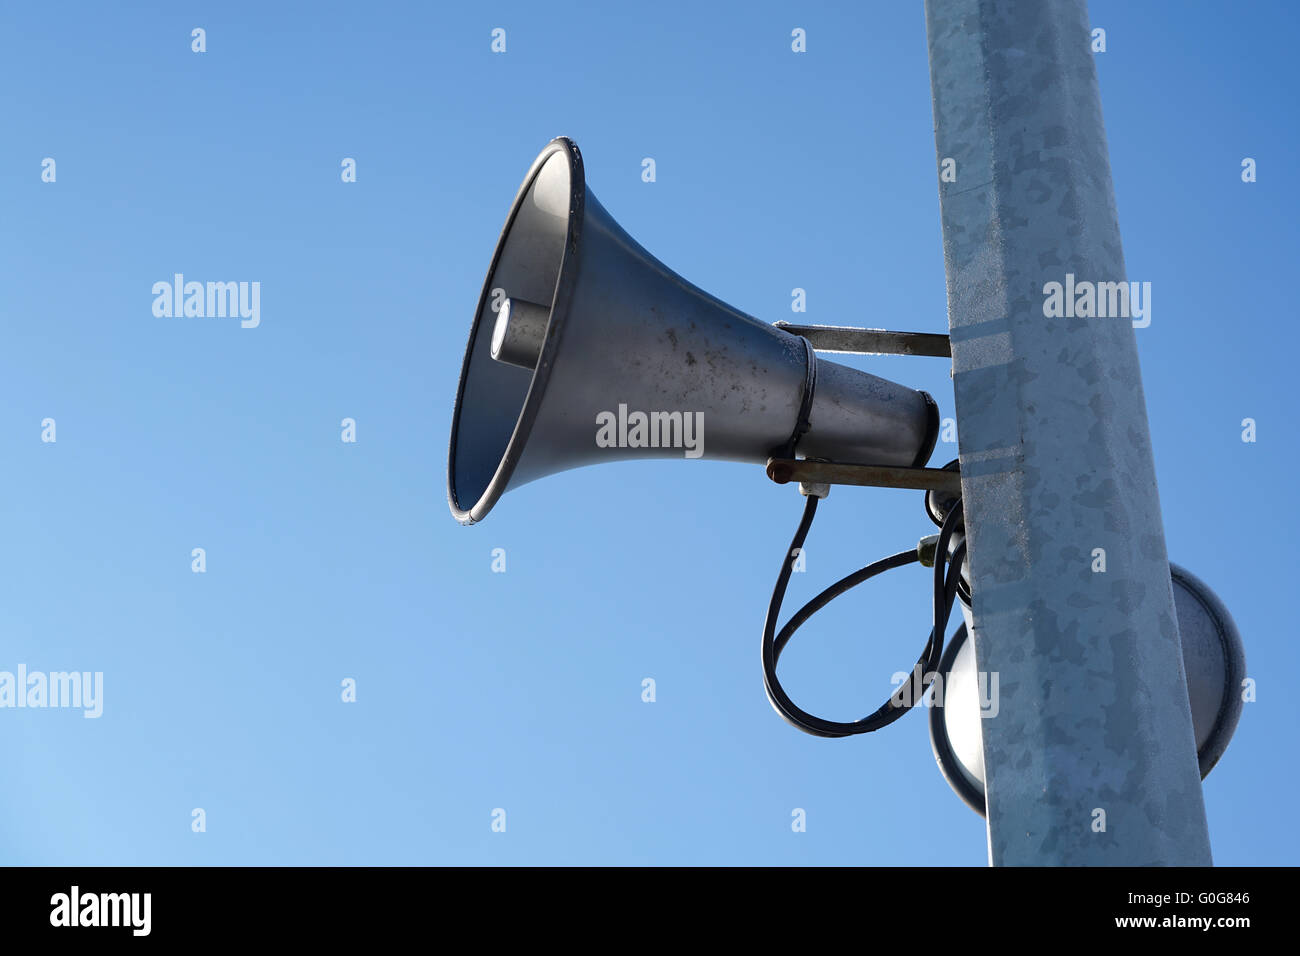 loudspeakers on a pole Stock Photo